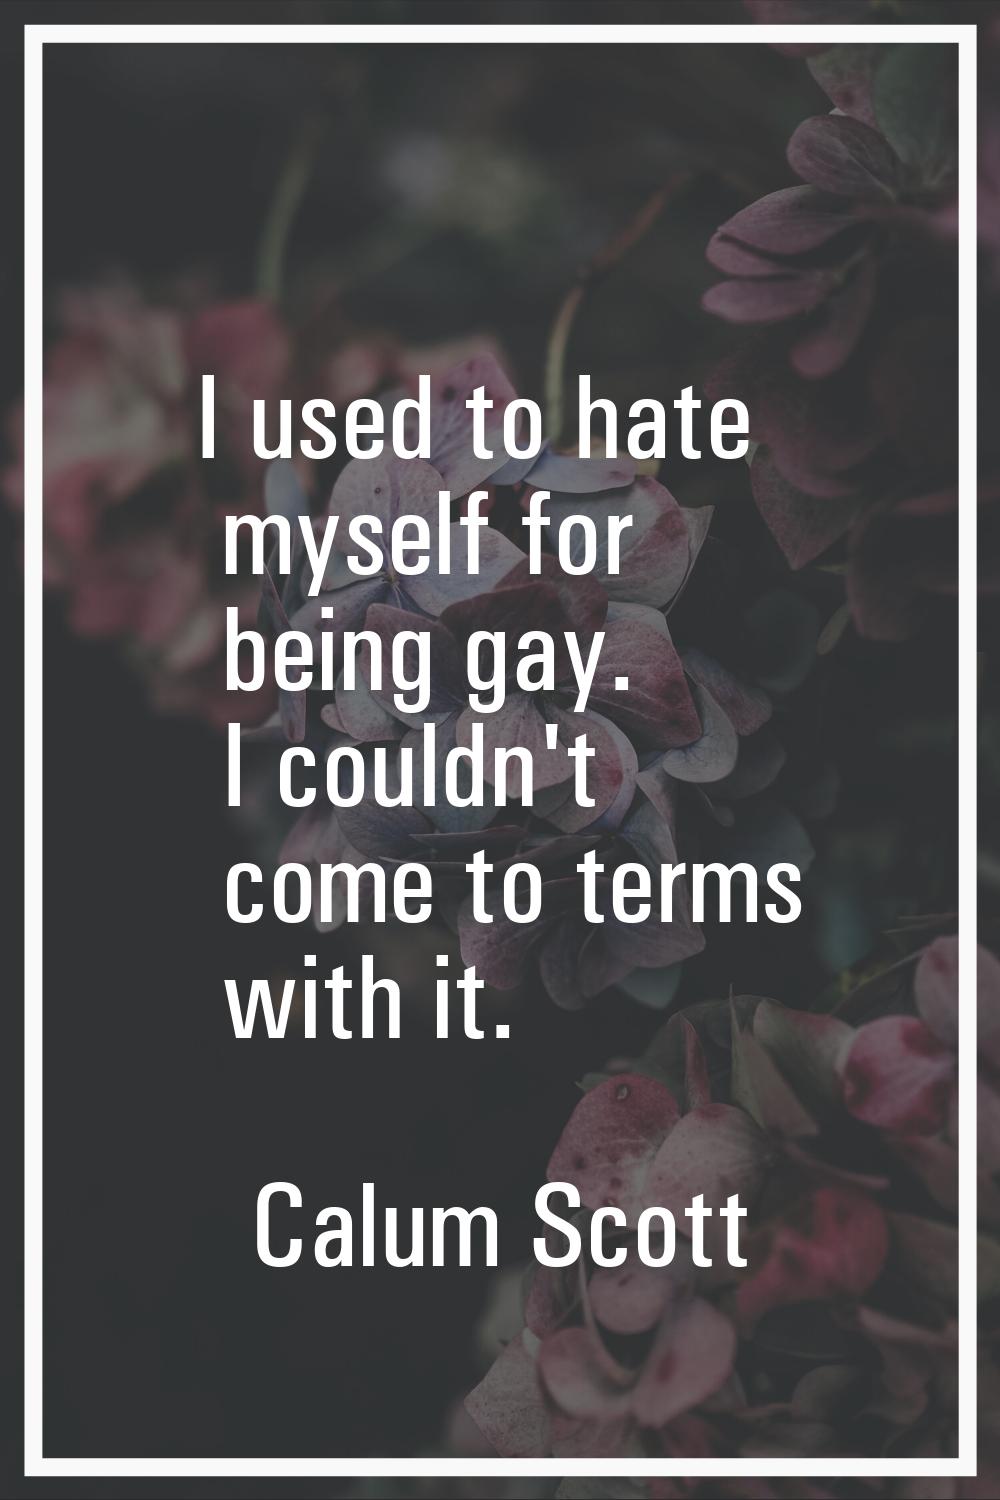 I used to hate myself for being gay. I couldn't come to terms with it.